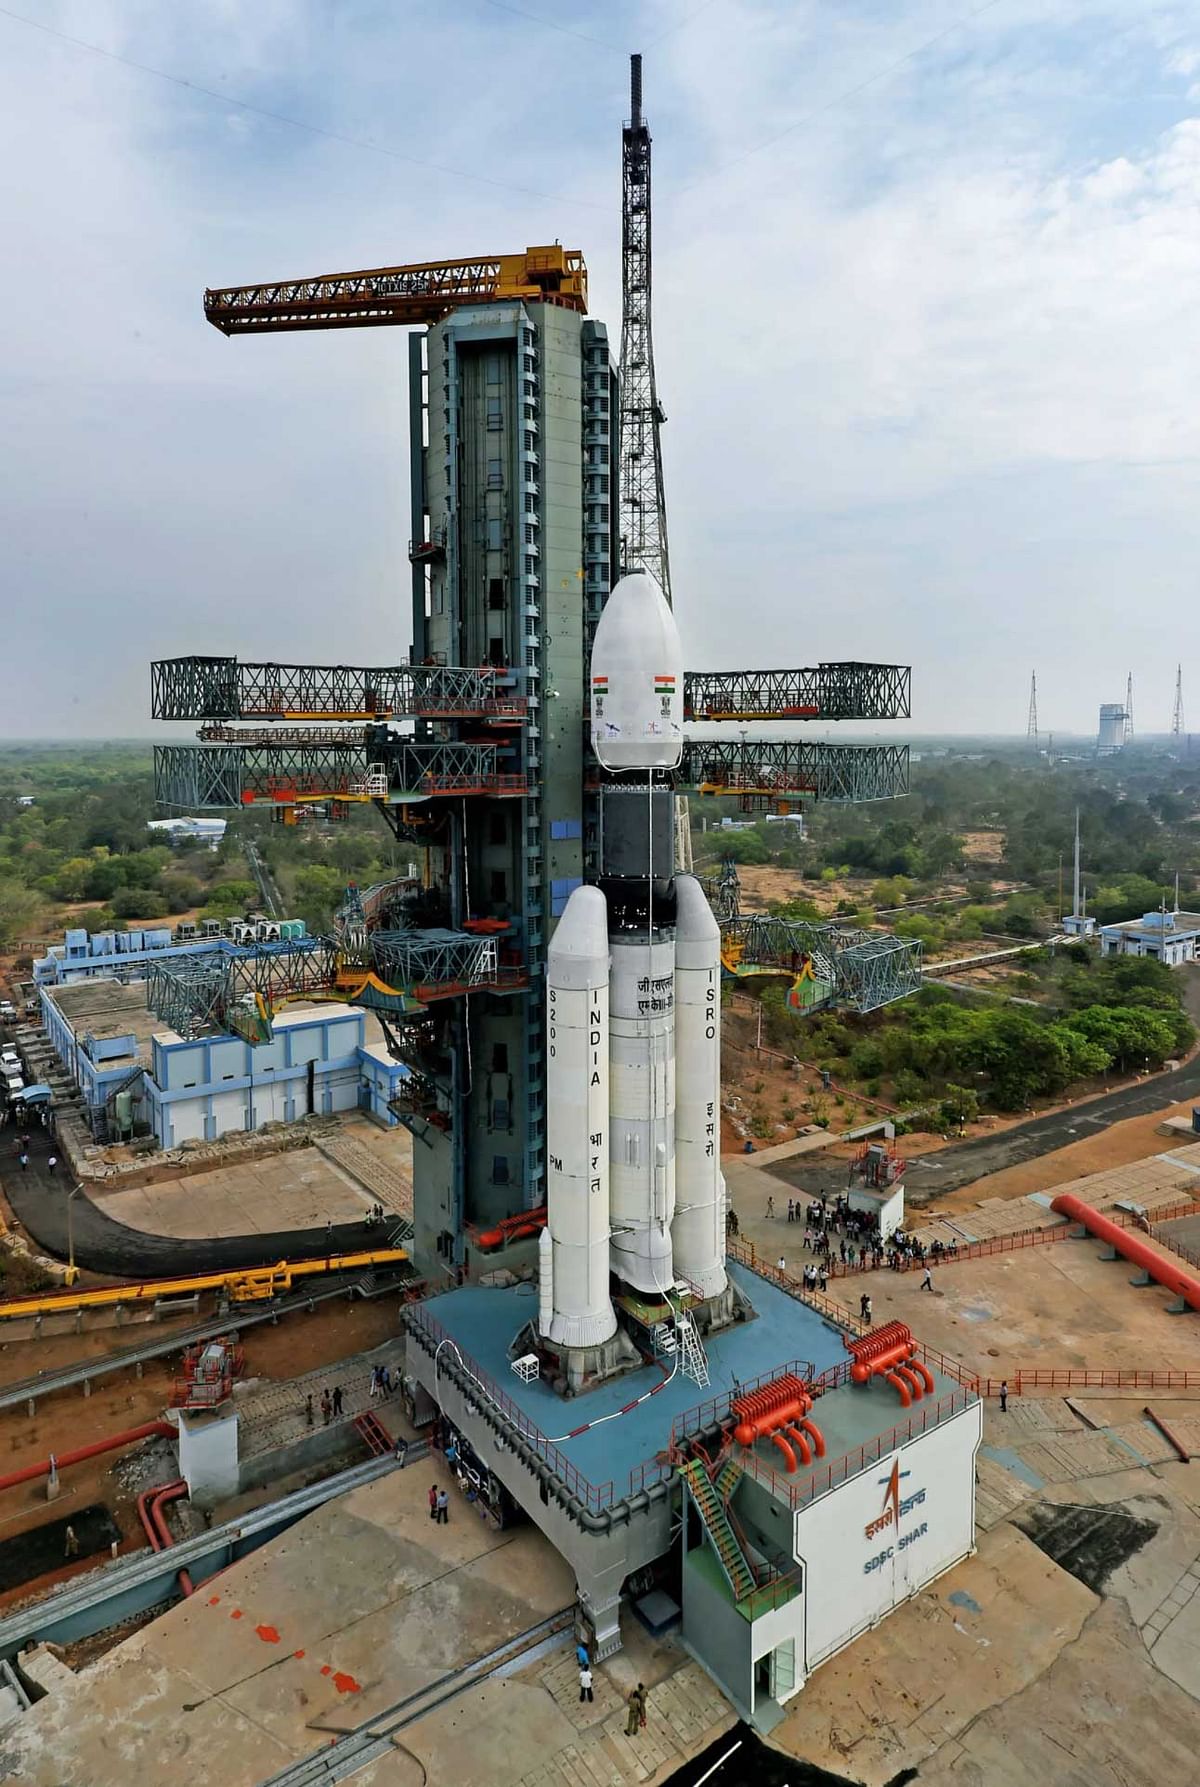 Indian Space Research Organisation had an eventful 2017 and here is what India’s premier space agency was up to.